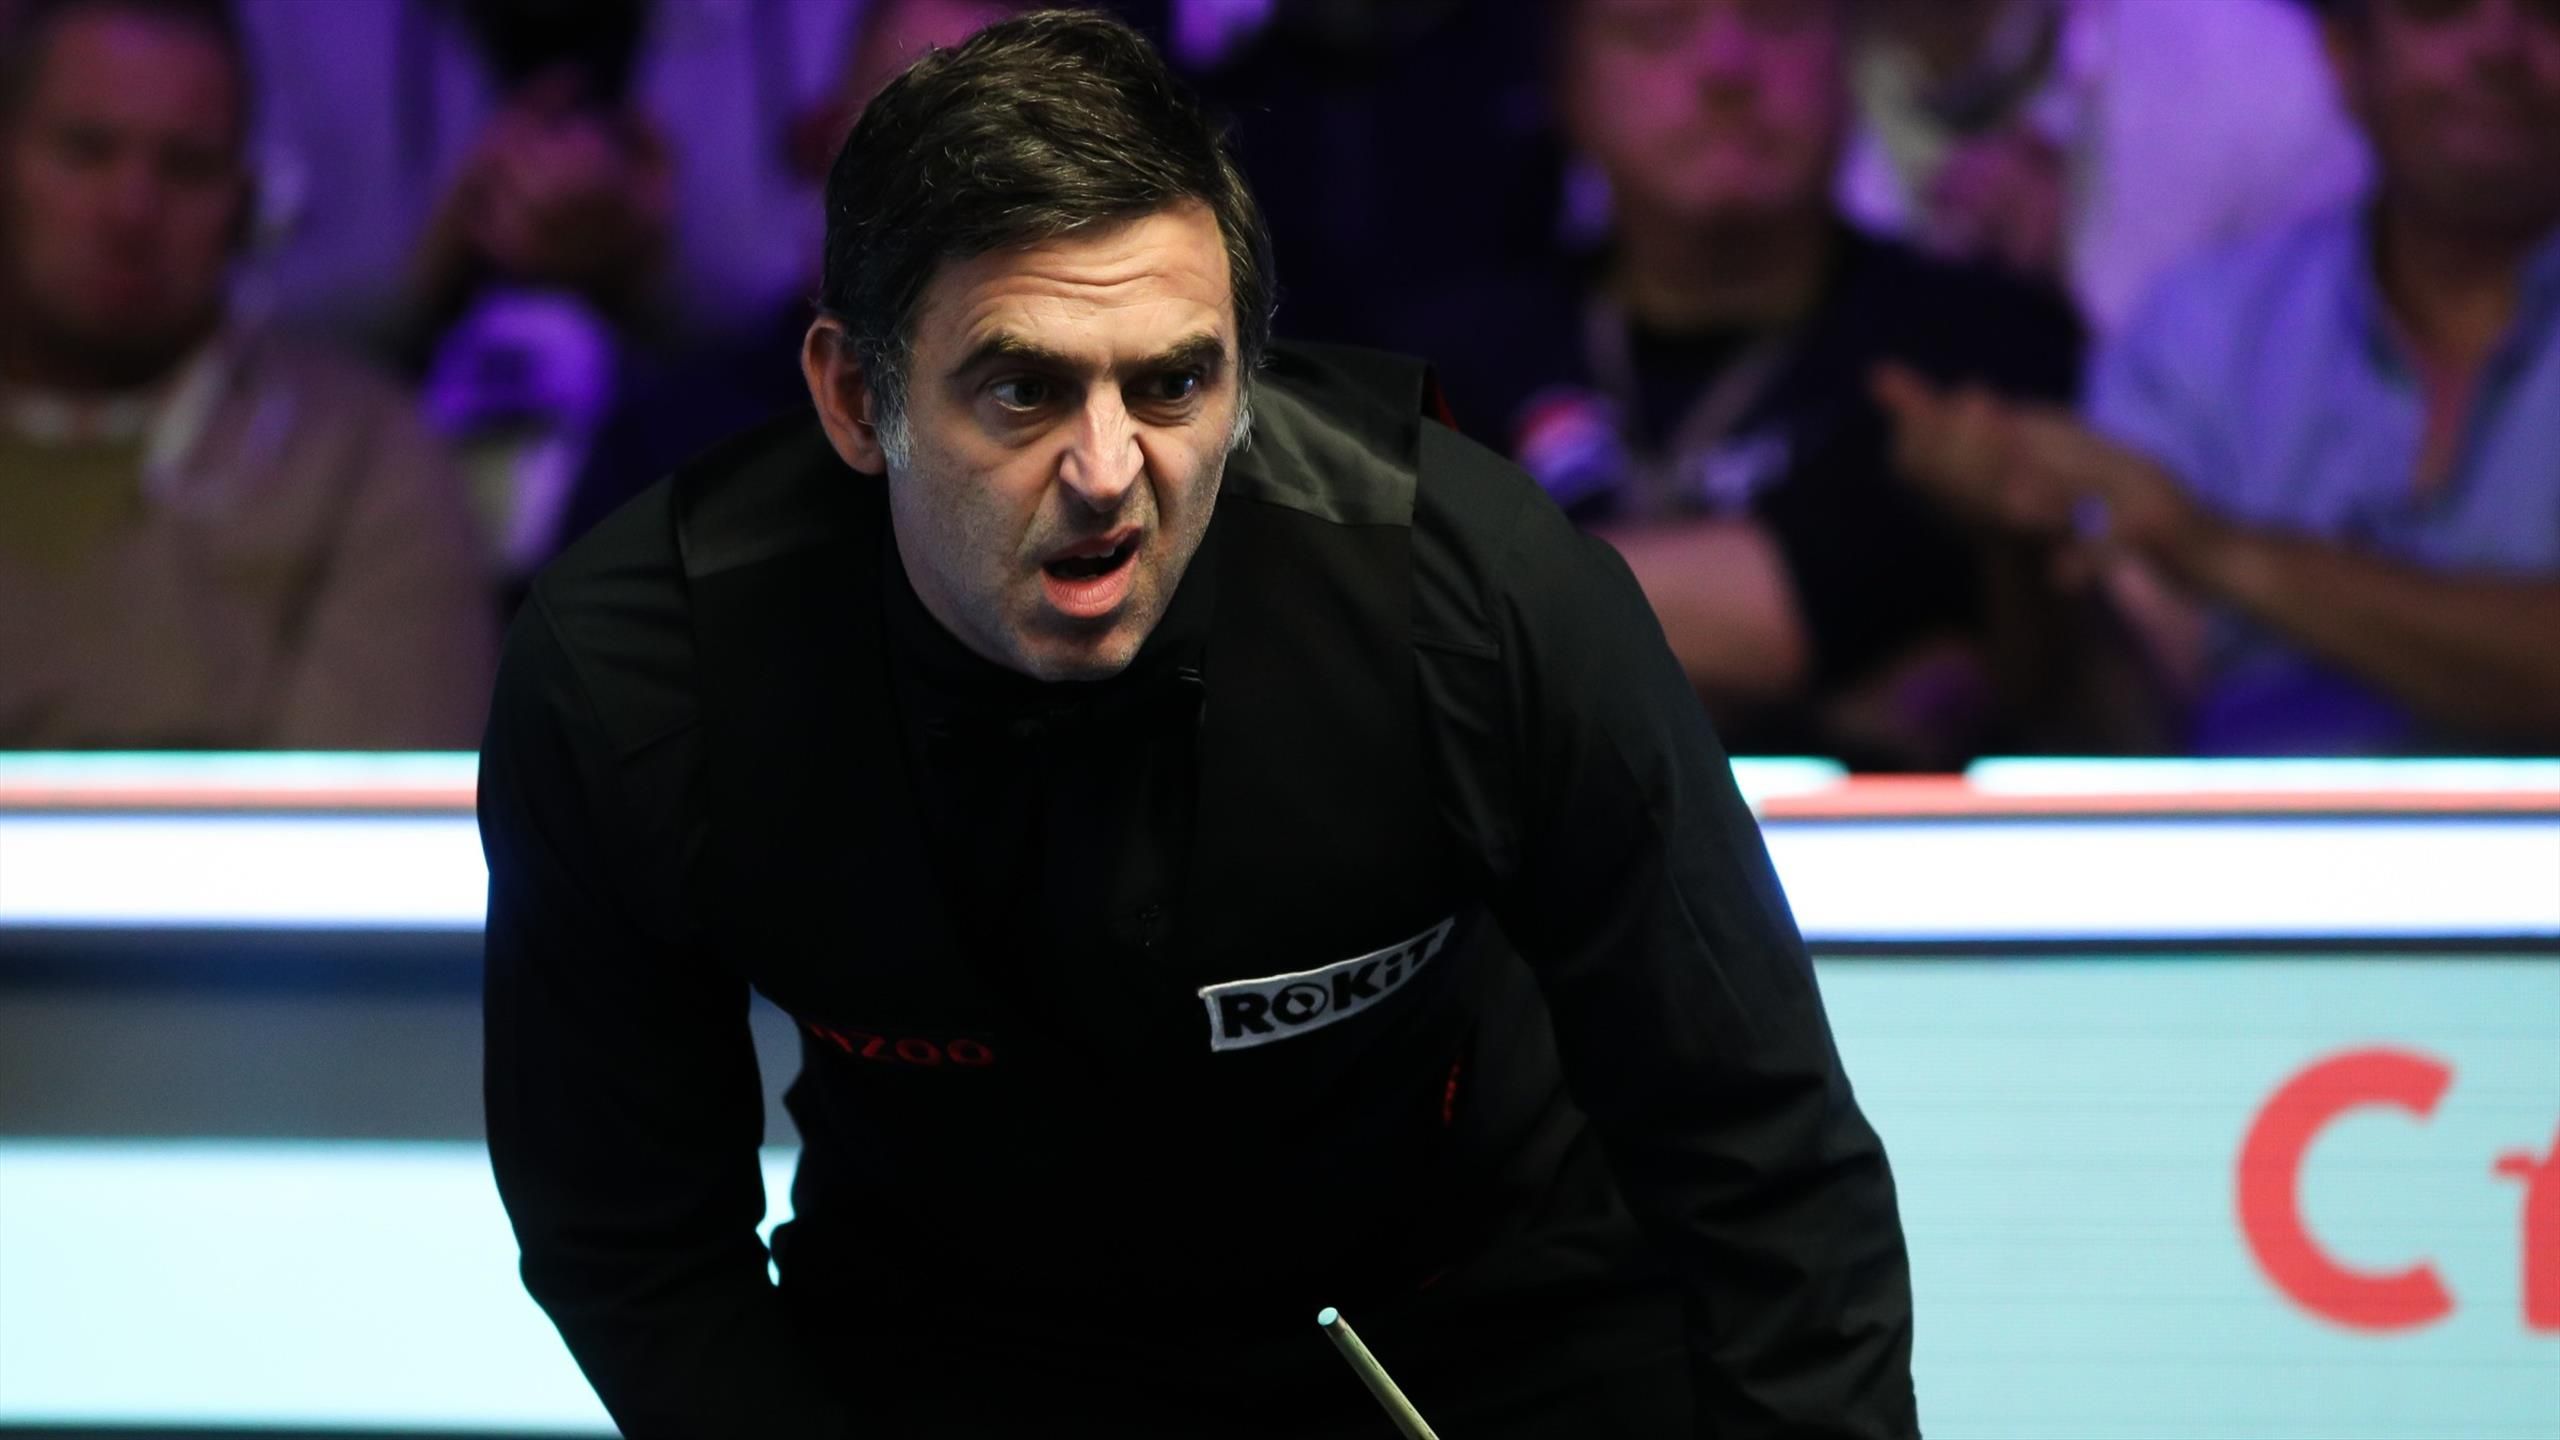 Tour Championship snooker 2023 - How to watch, TV schedule, is Ronnie OSullivan playing the eight-player event?